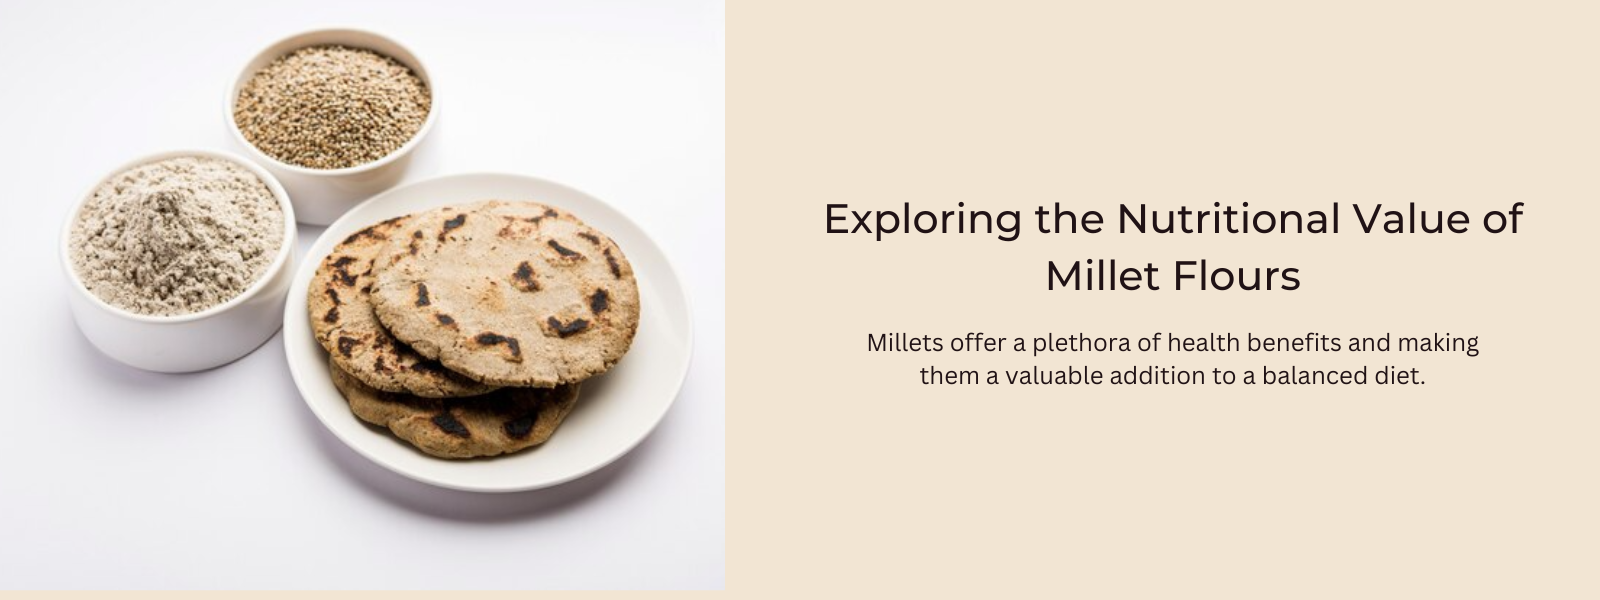 Exploring the Nutritional Value of Millet Flours